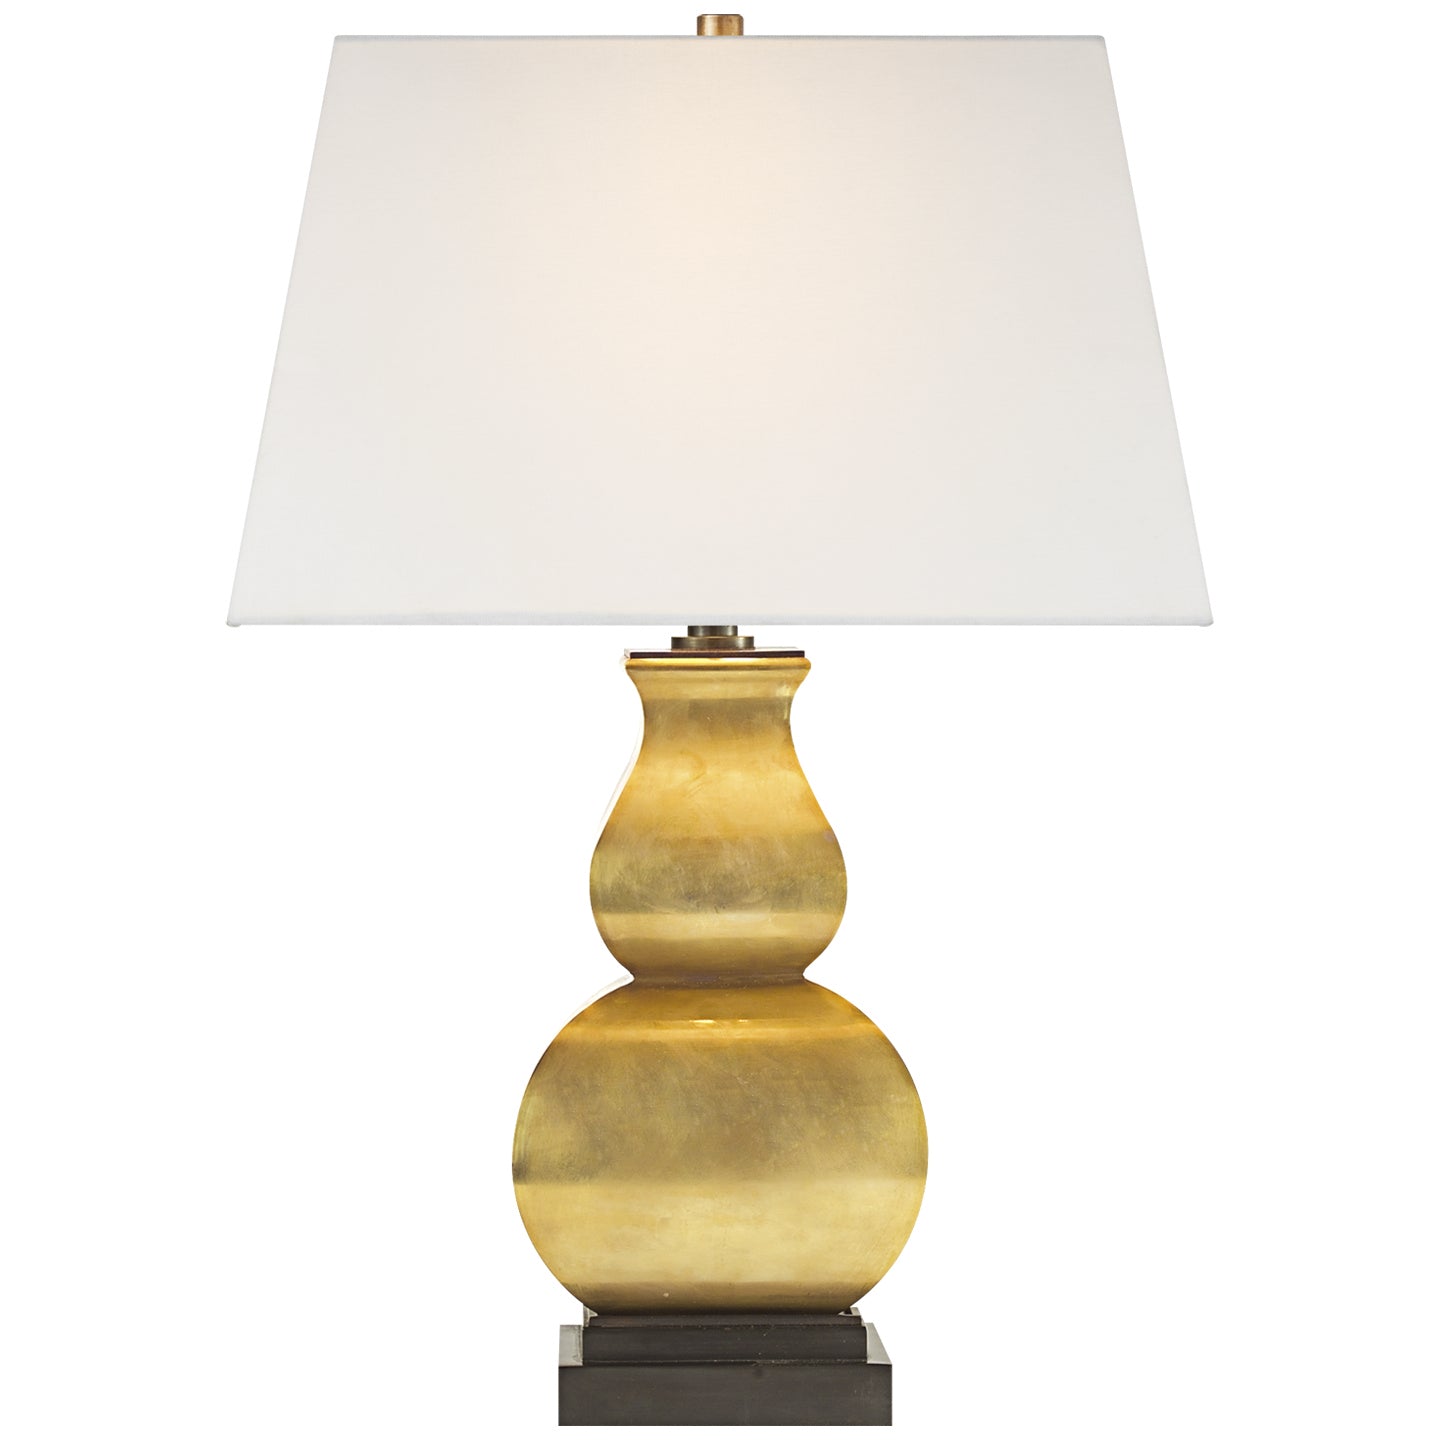 Visual Comfort Signature - CHA 8627AB-L - One Light Table Lamp - Fang Gourd - Antique-Burnished Brass